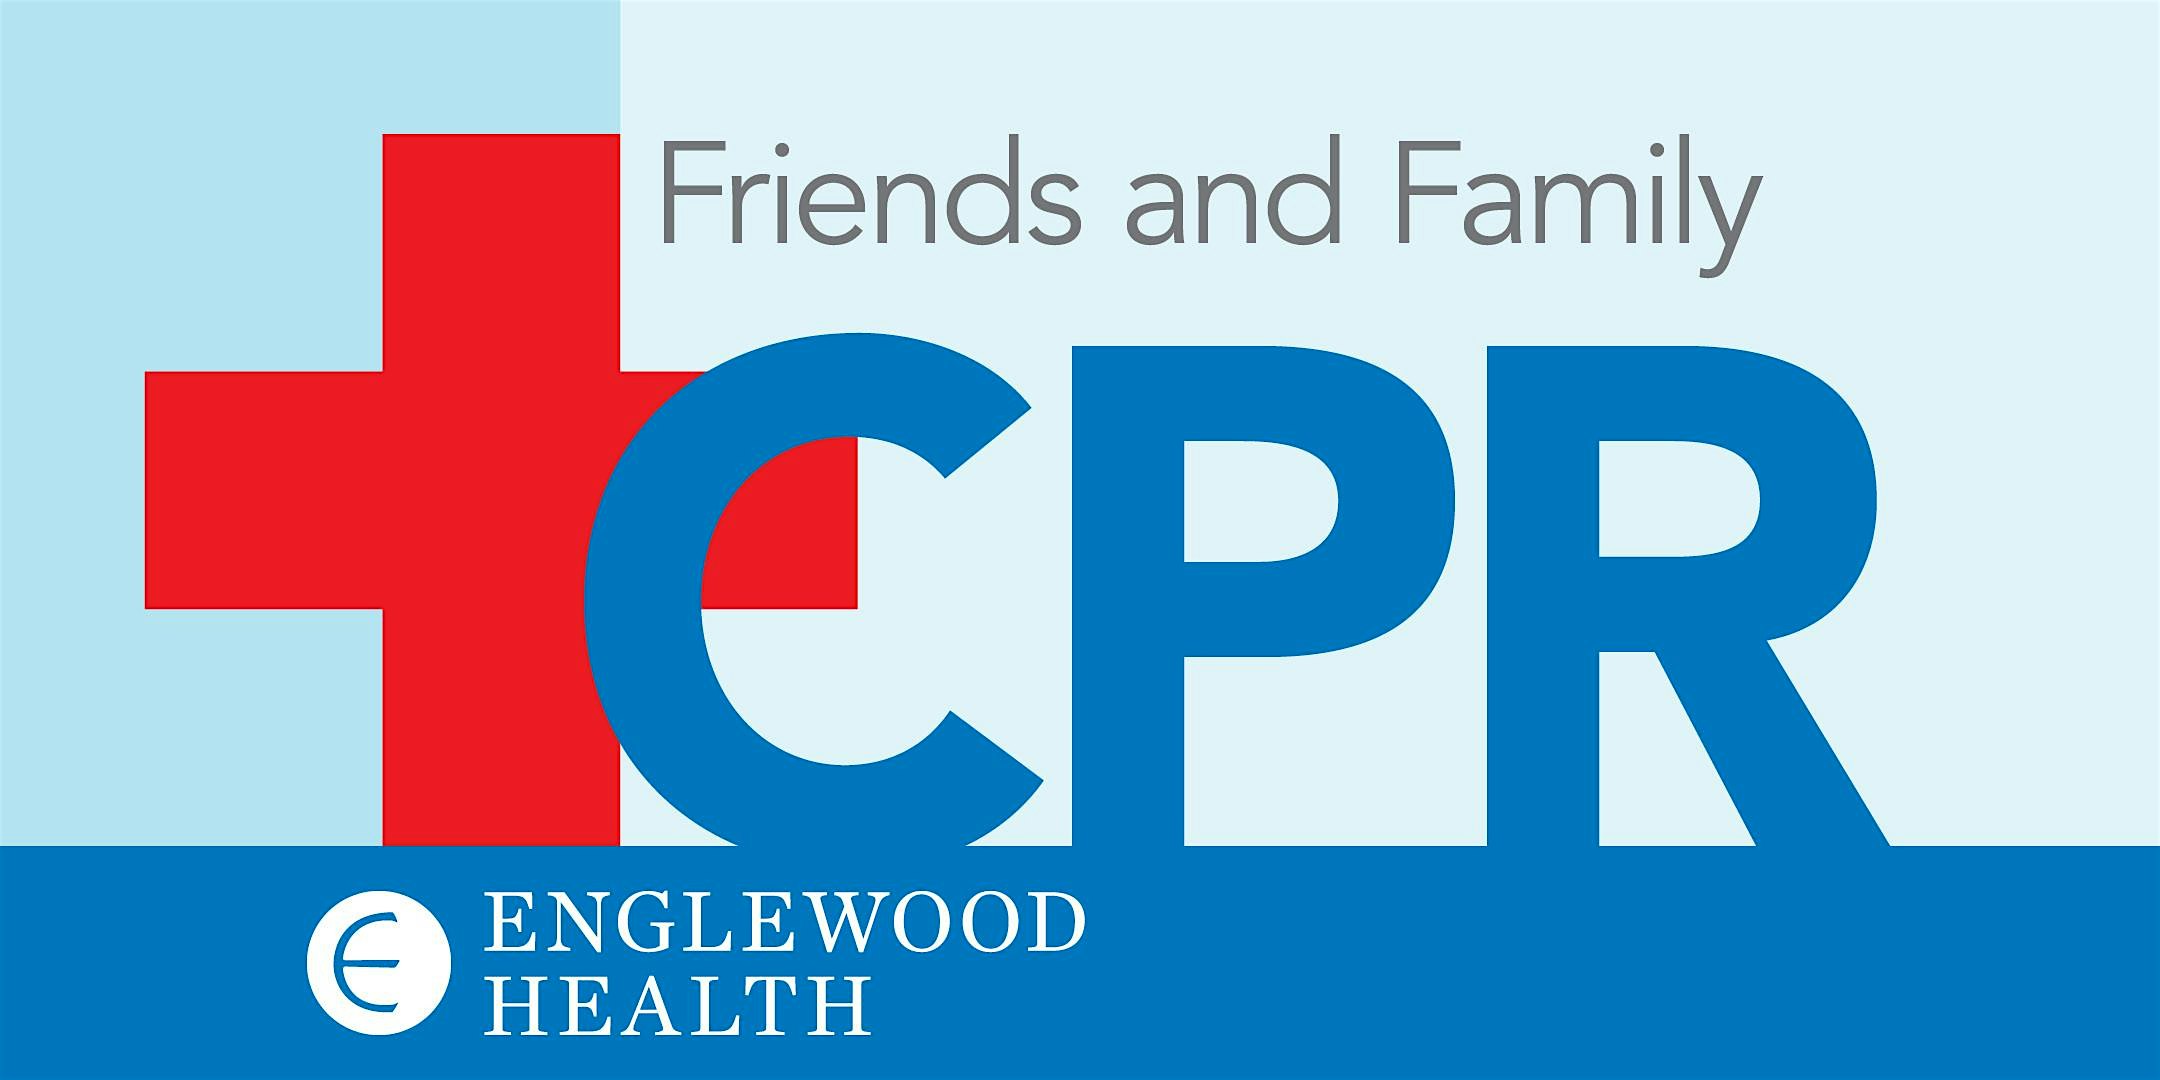 More info: Friends and Family CPR